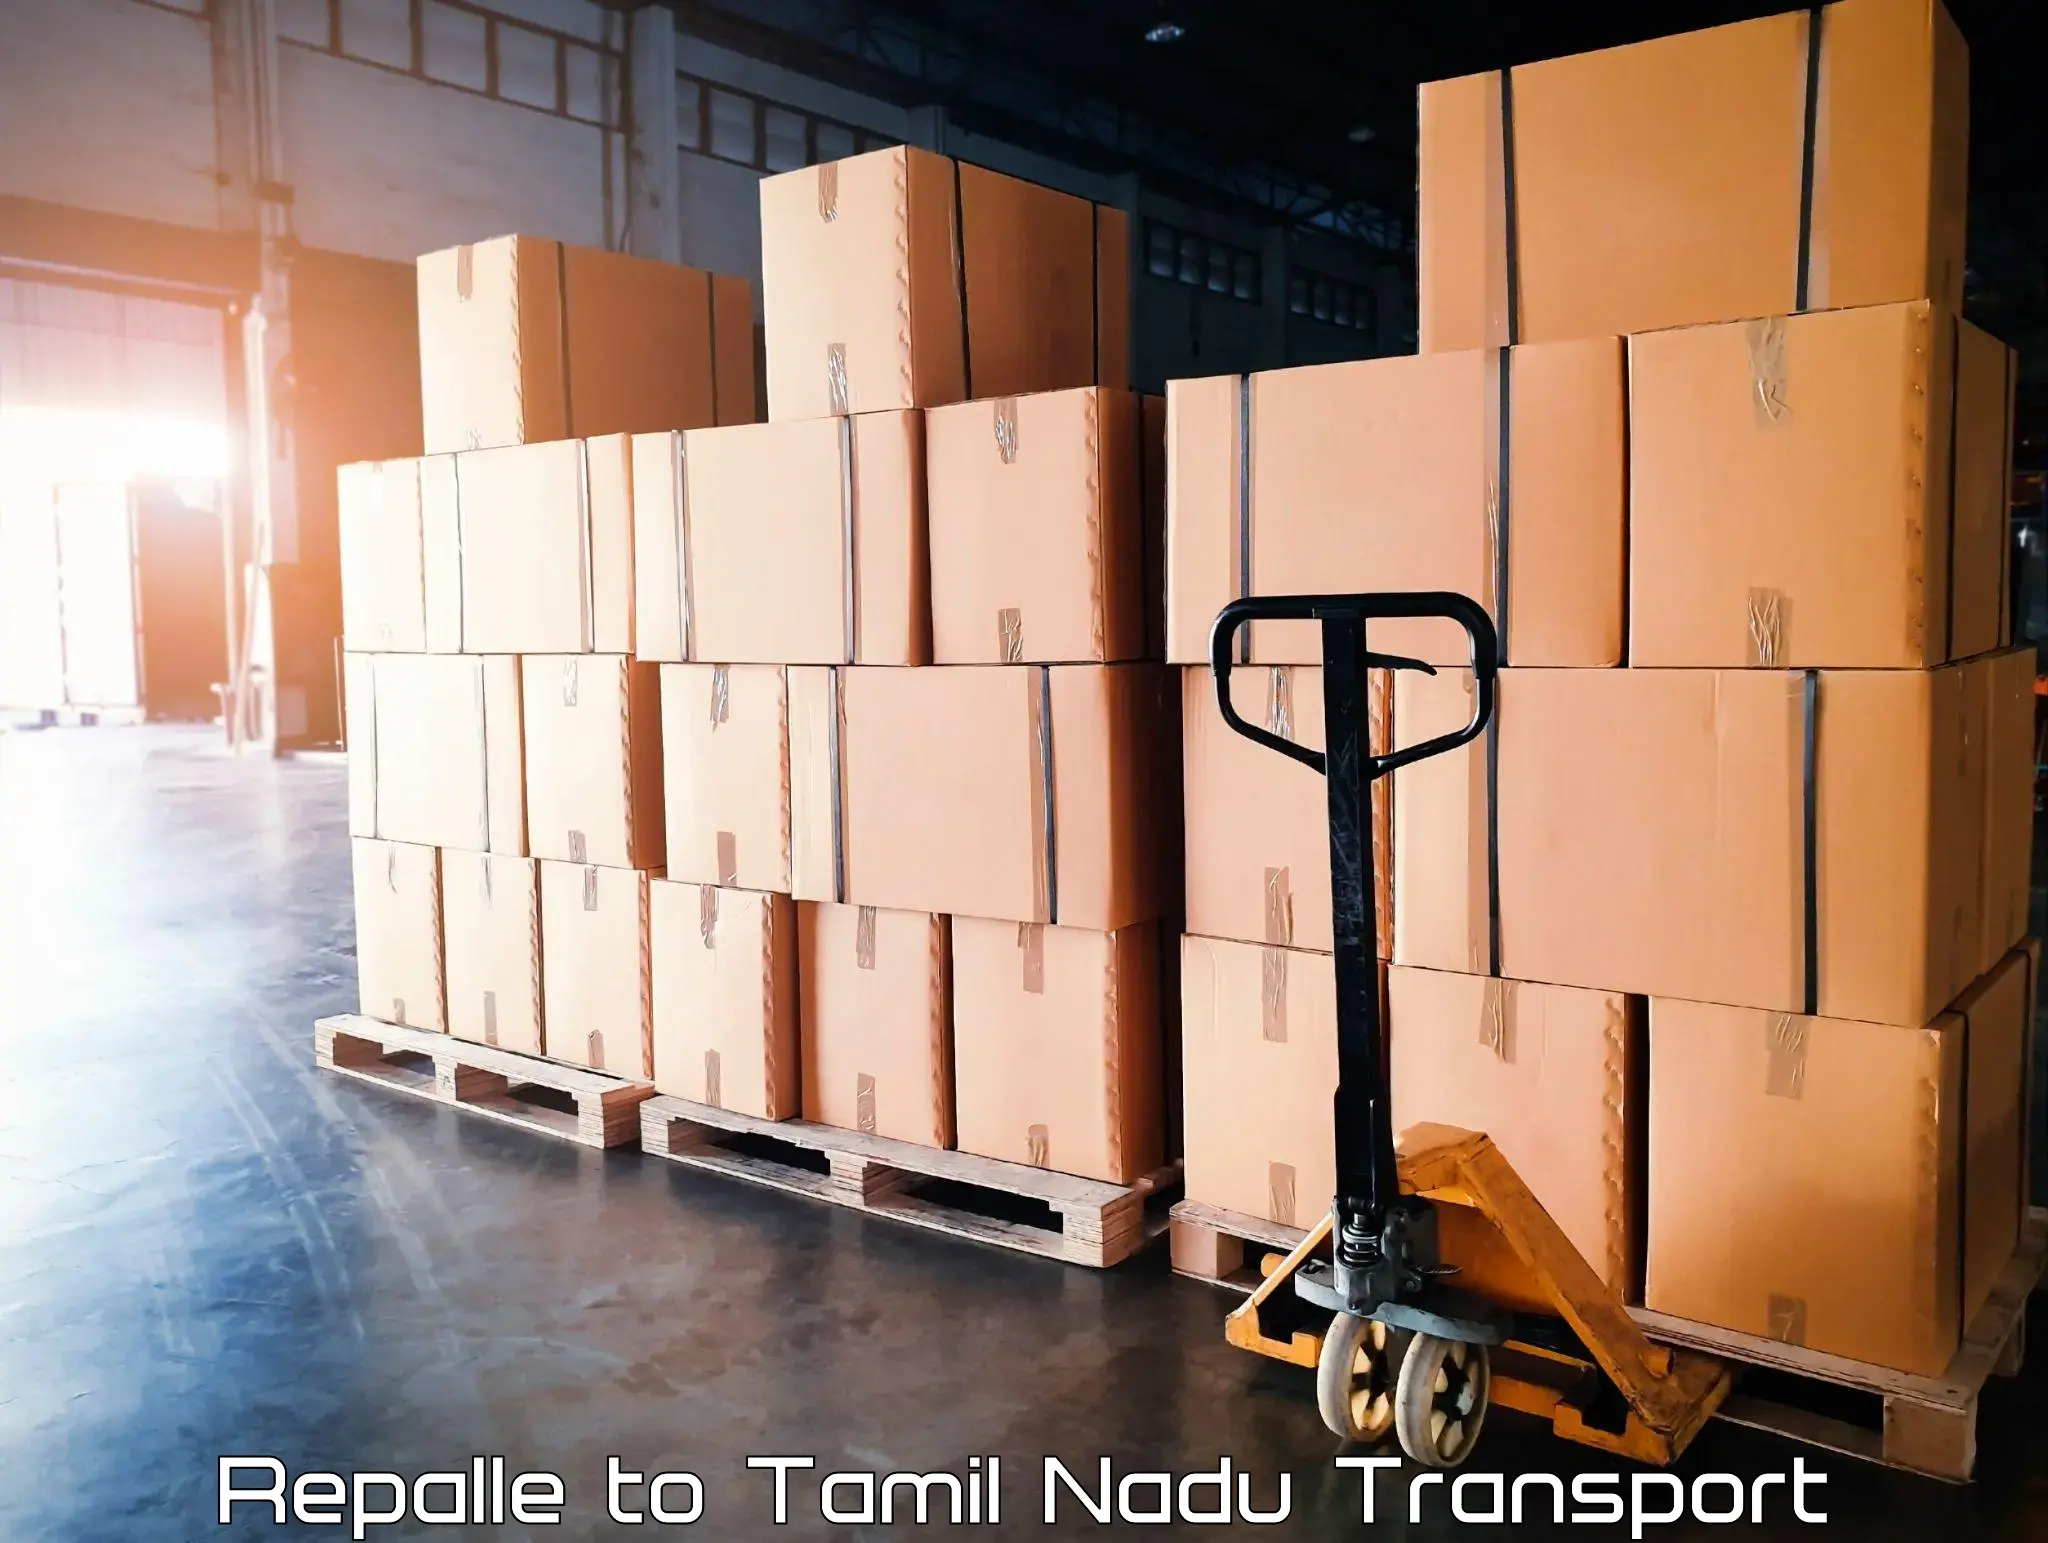 Online transport service Repalle to Ennore Port Chennai